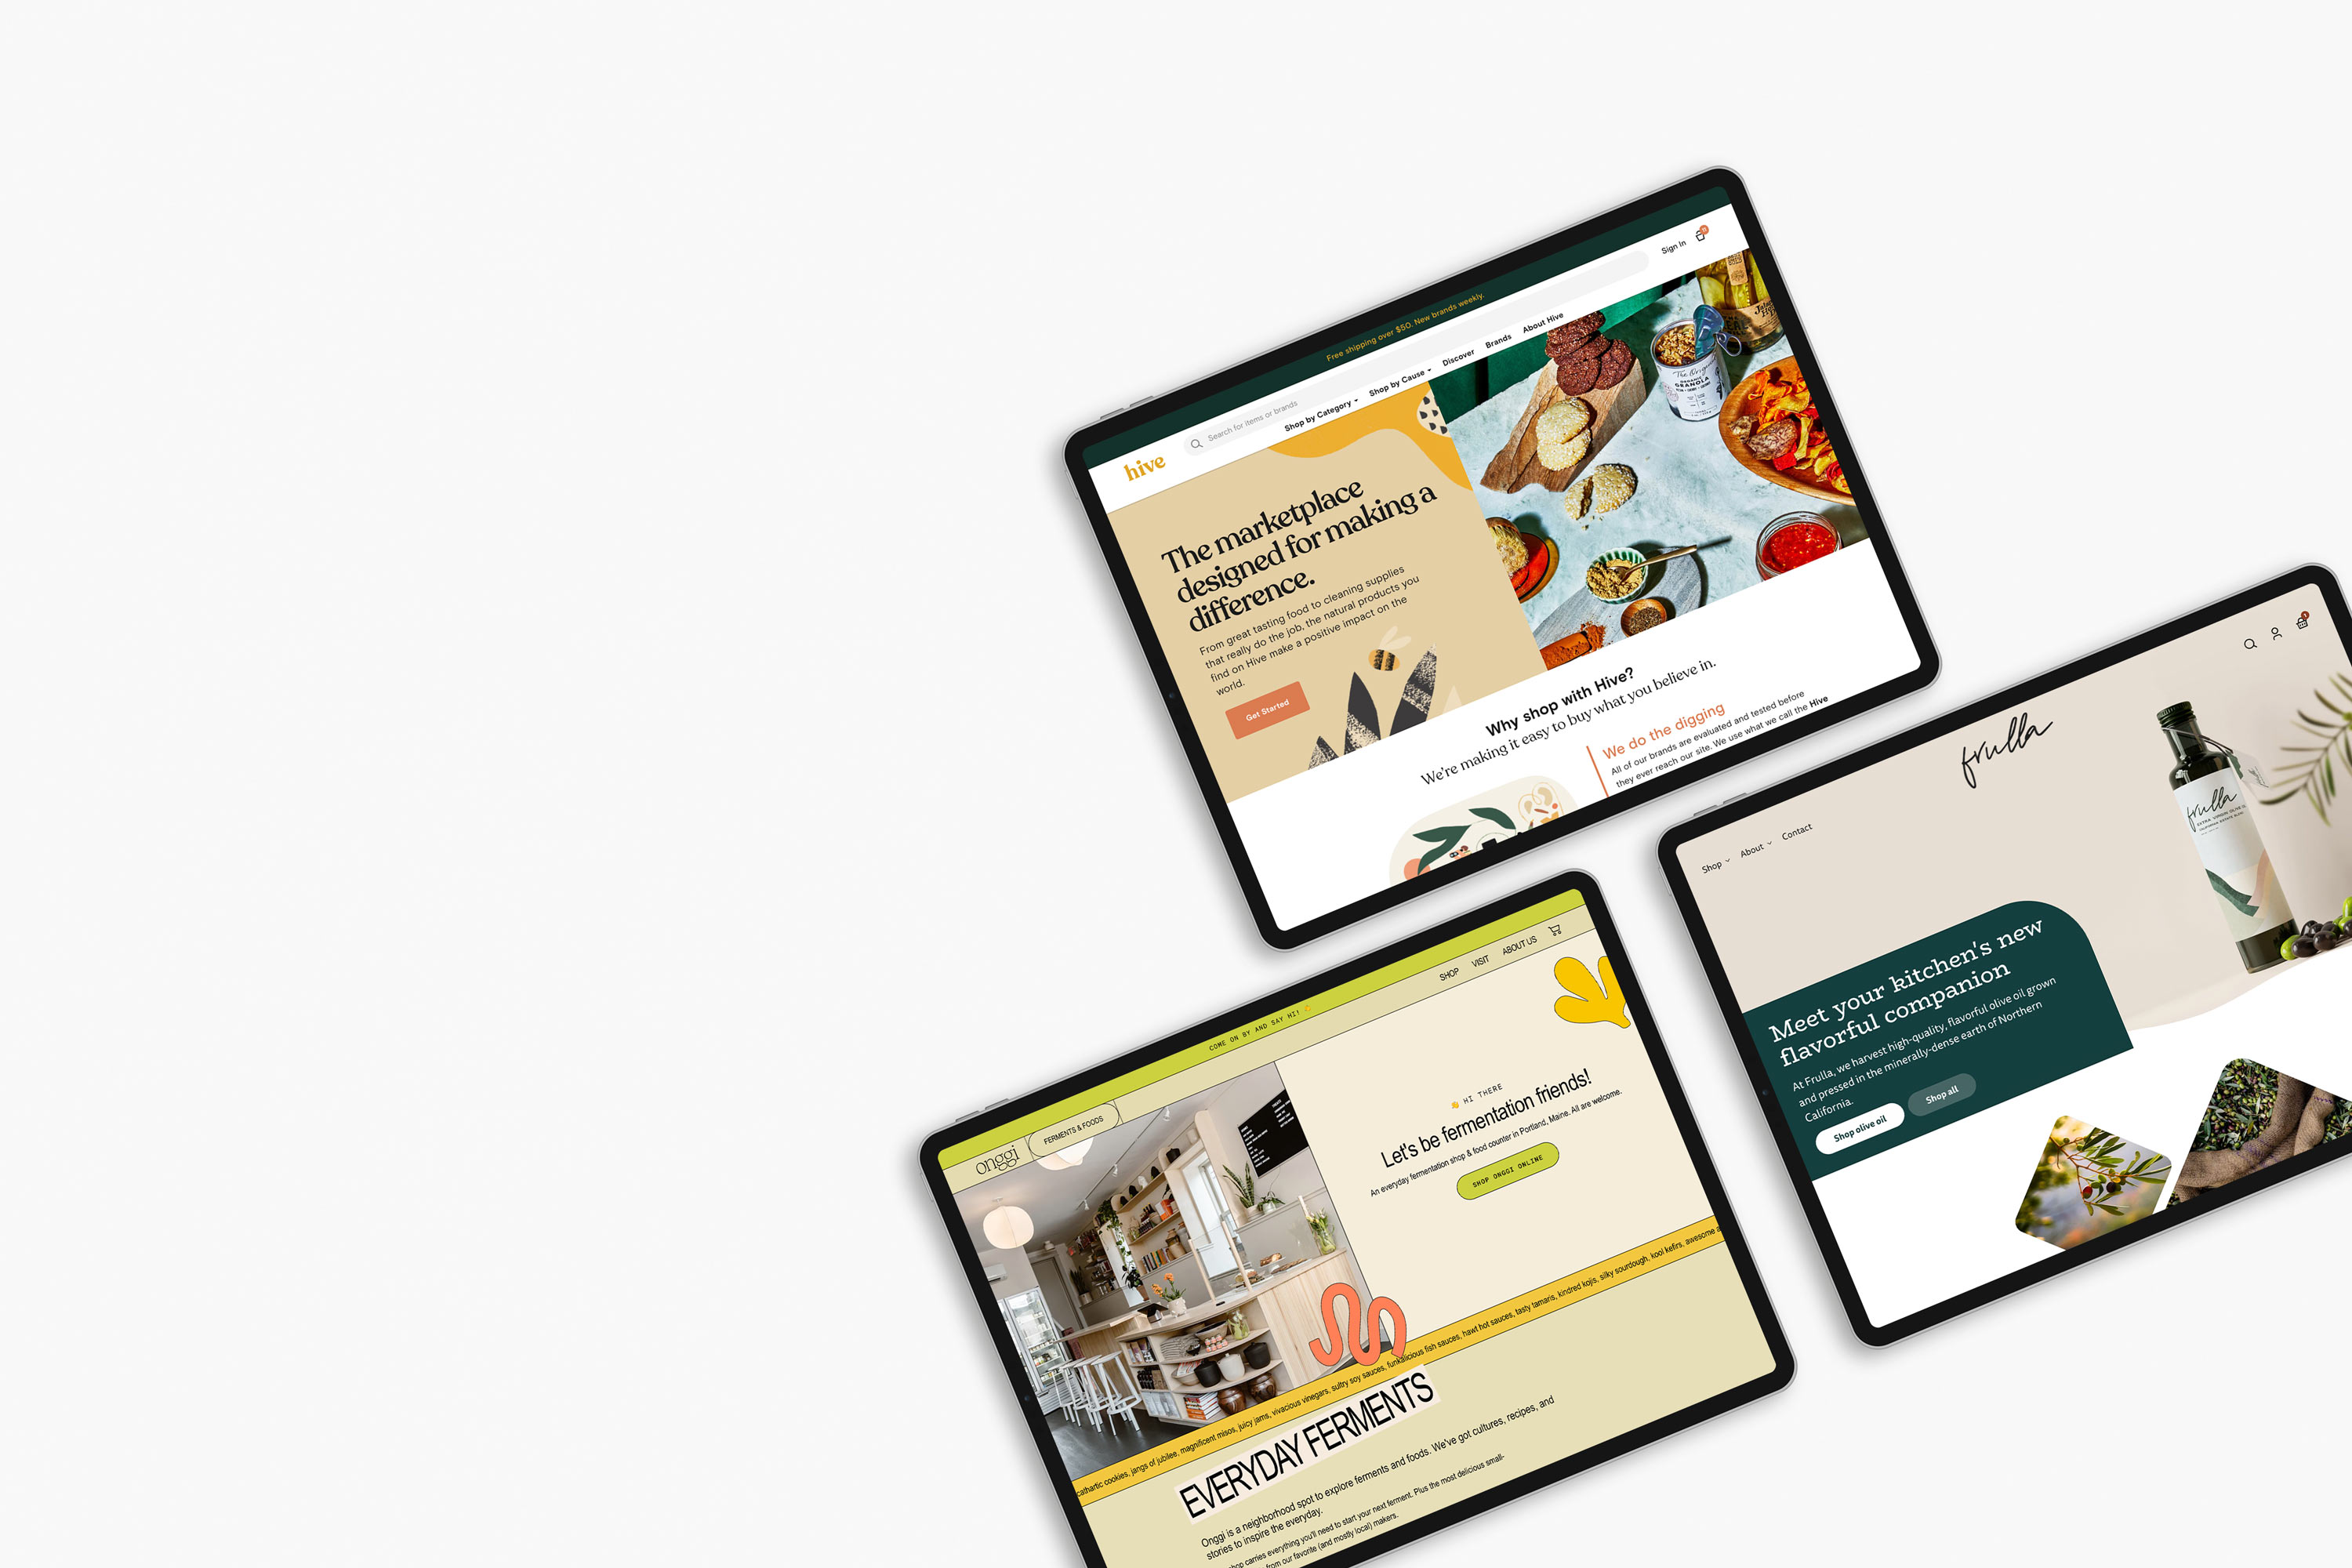 3 ipads, each with a screenshot of the homepage from different websites built by Coquelicot